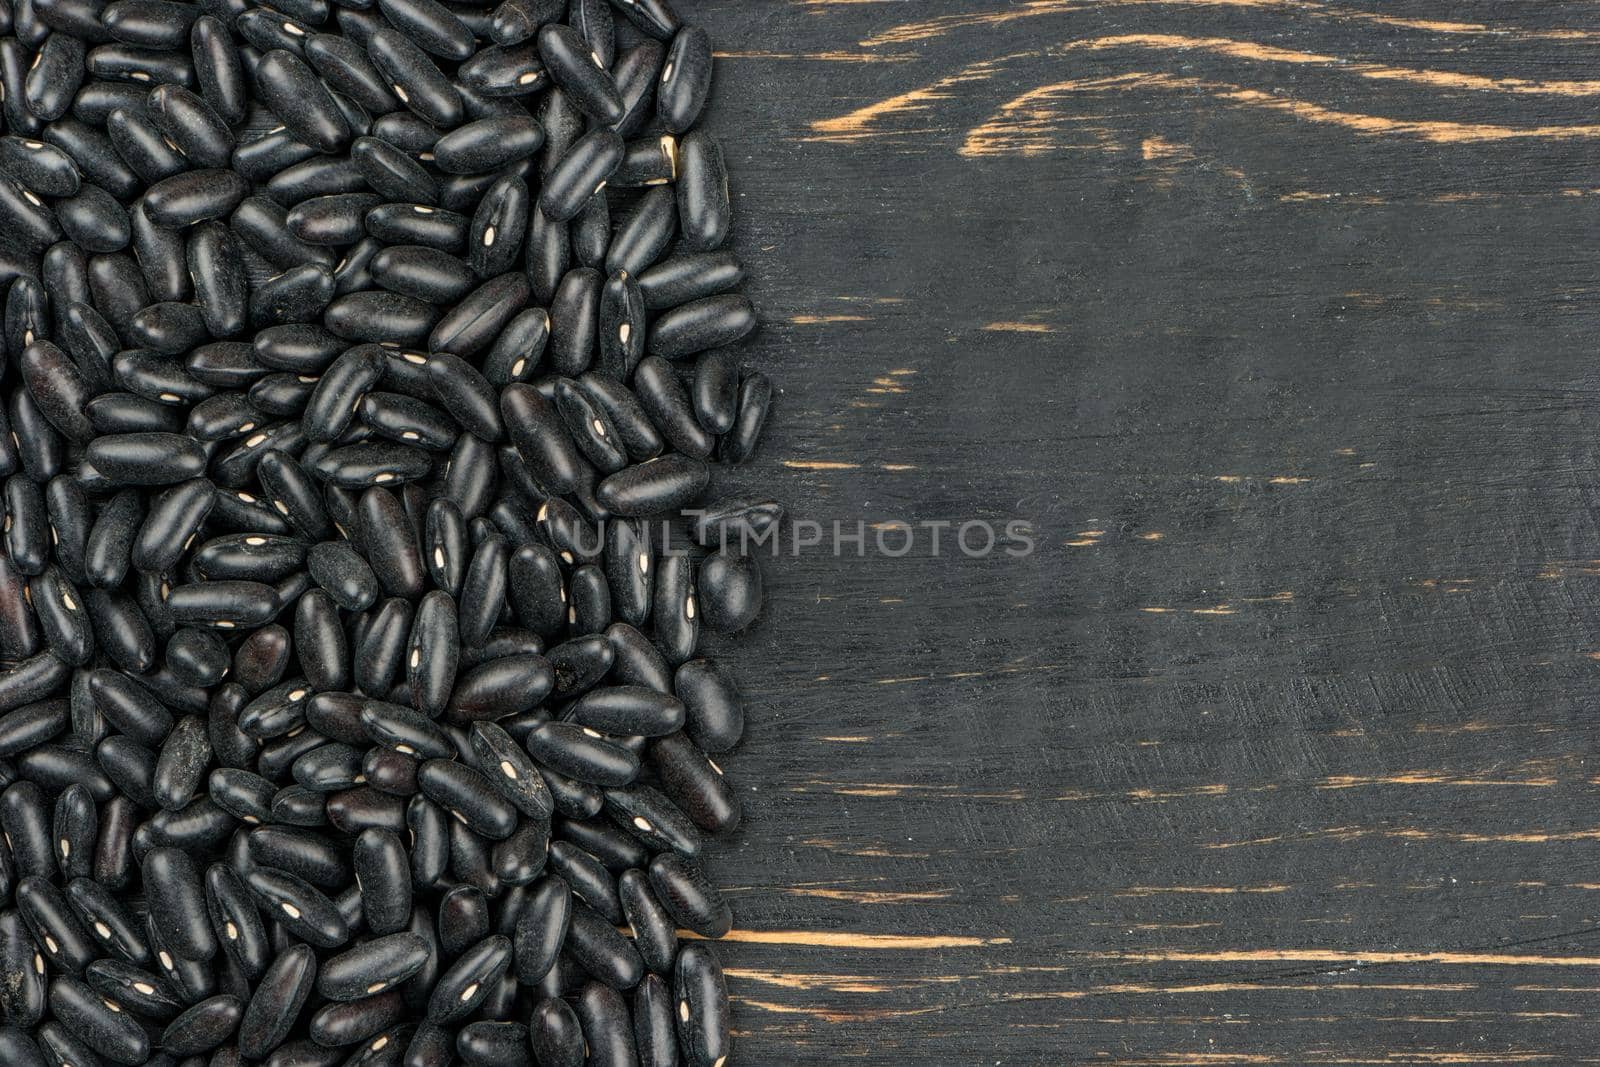 Raw black beans by andregric